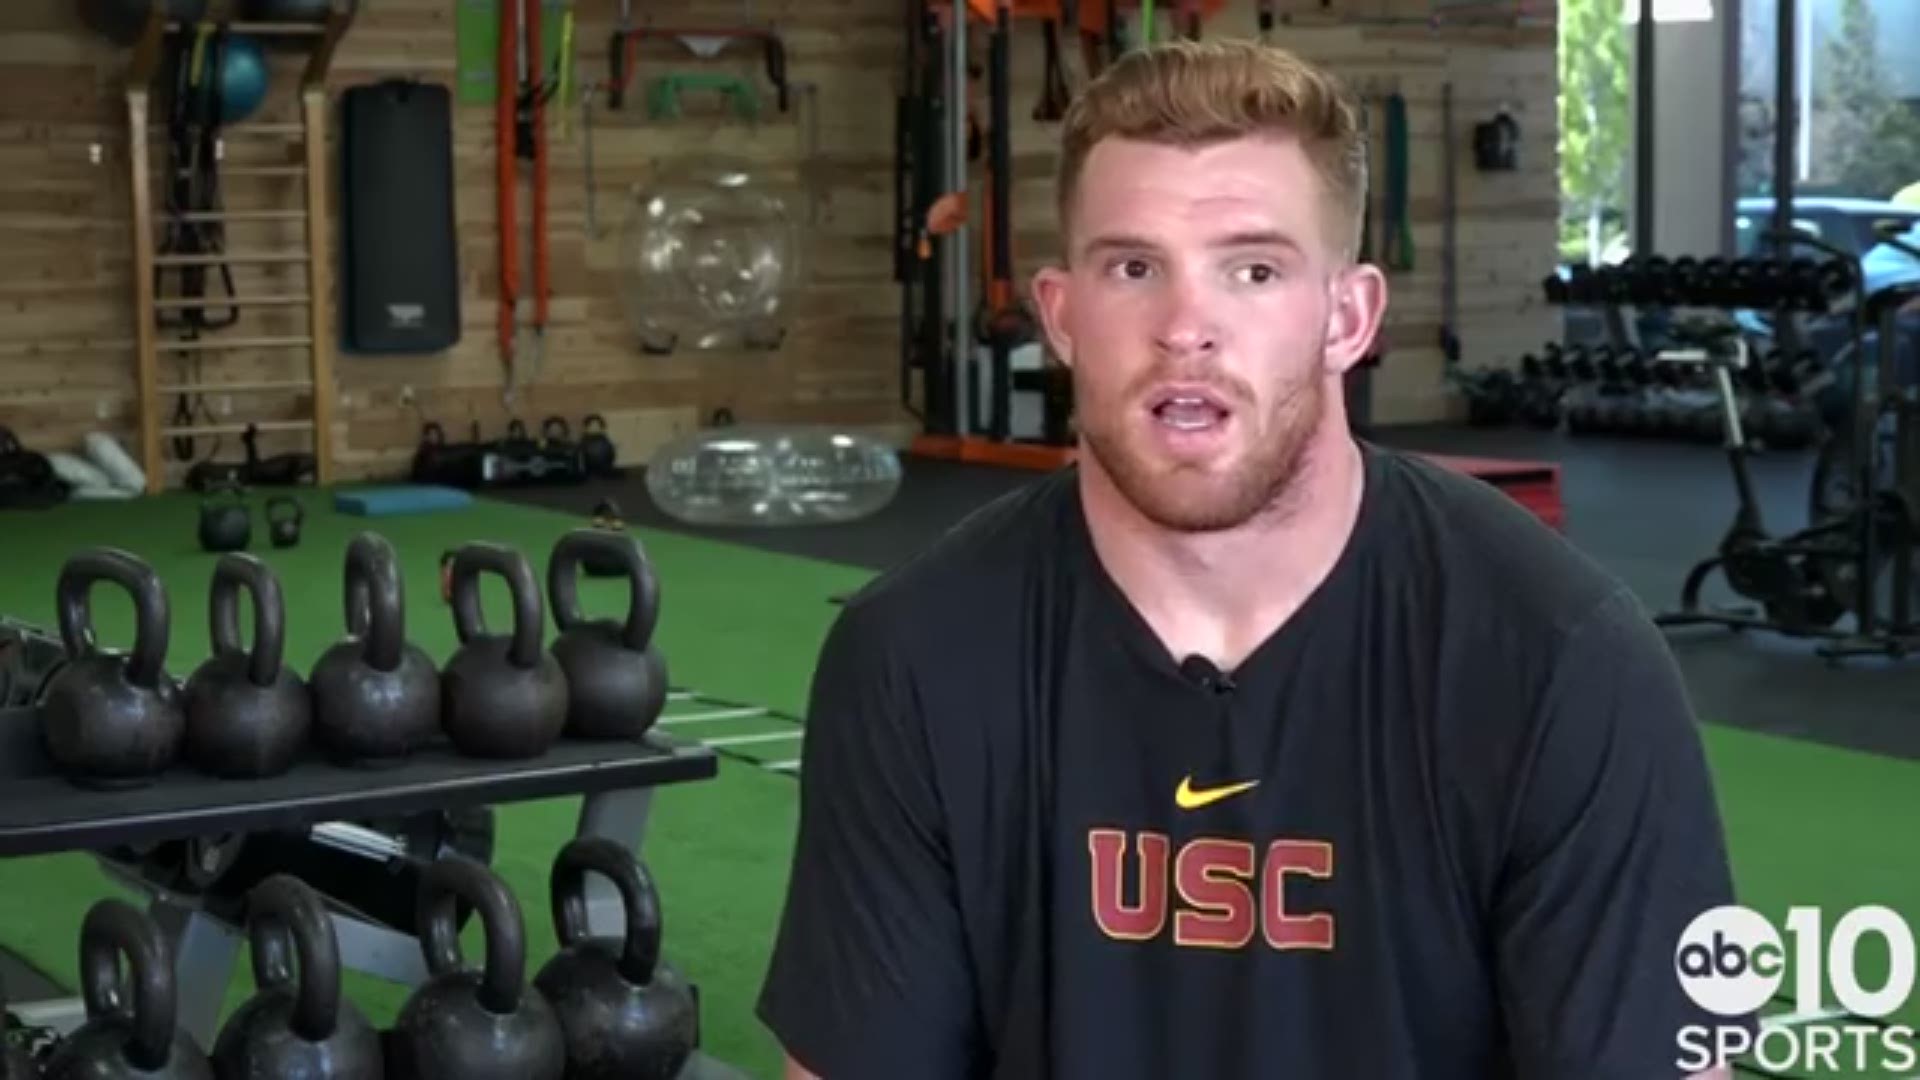 Former Granite Bay high school star and USC linebacker Cameron Smith talks to ABC10's Sean Cunningham and Lina Washington about his preparations for the NFL Draft, seeing his dream become a reality, his standout moment in college and what he'll bring to an NFL team.